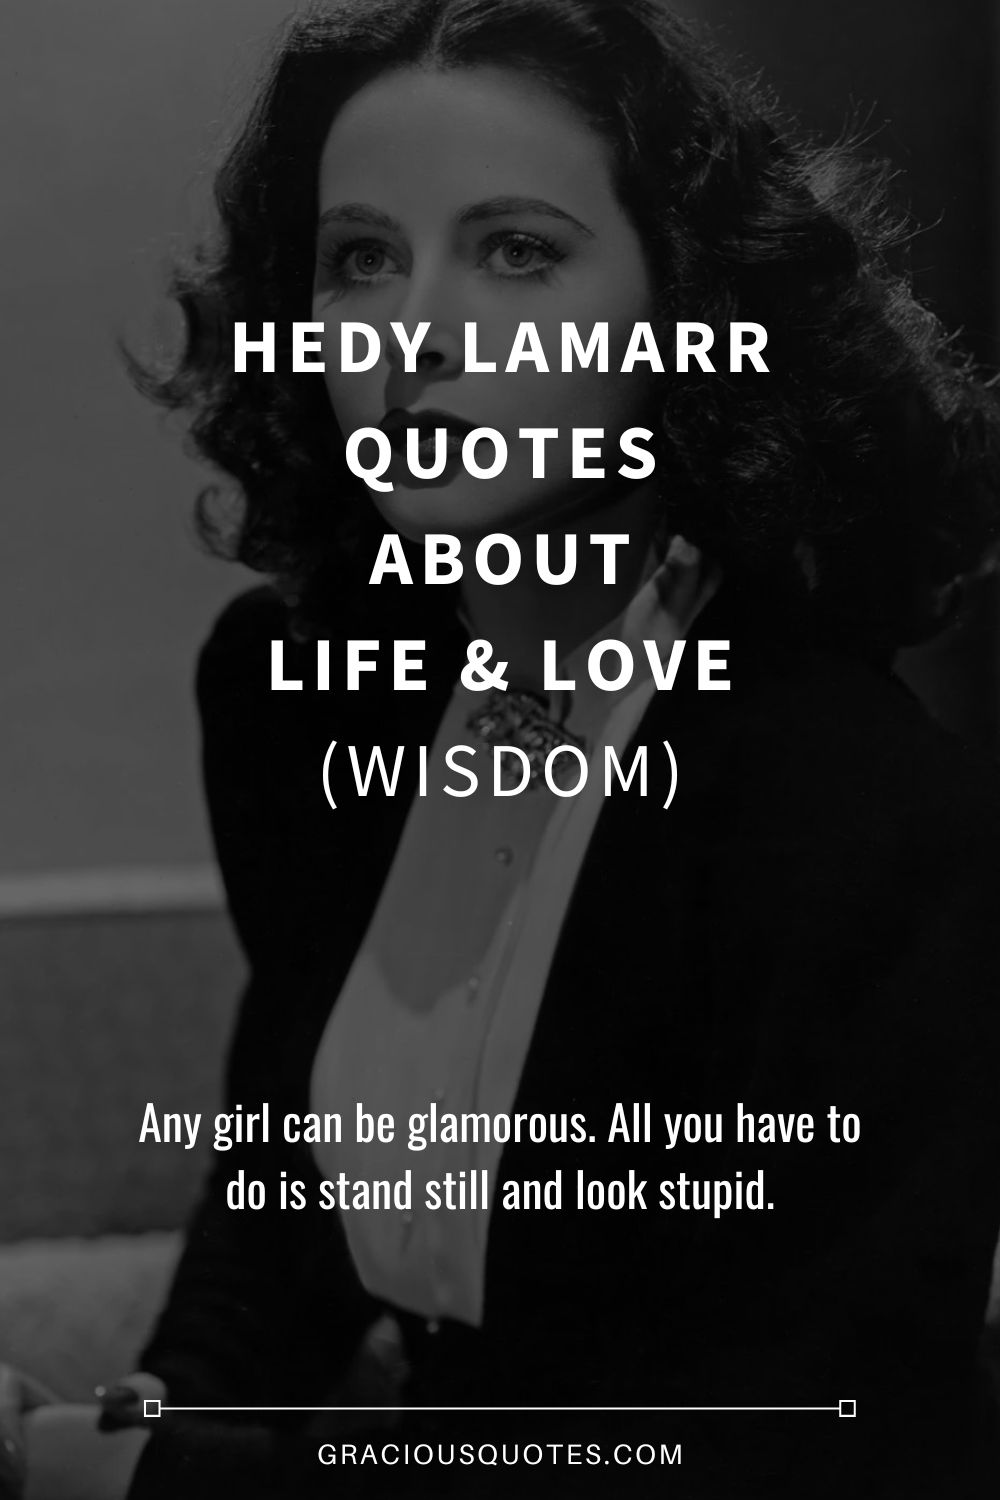 Hedy Lamarr Quotes About Life & Love (WISDOM) - Gracious Quotes